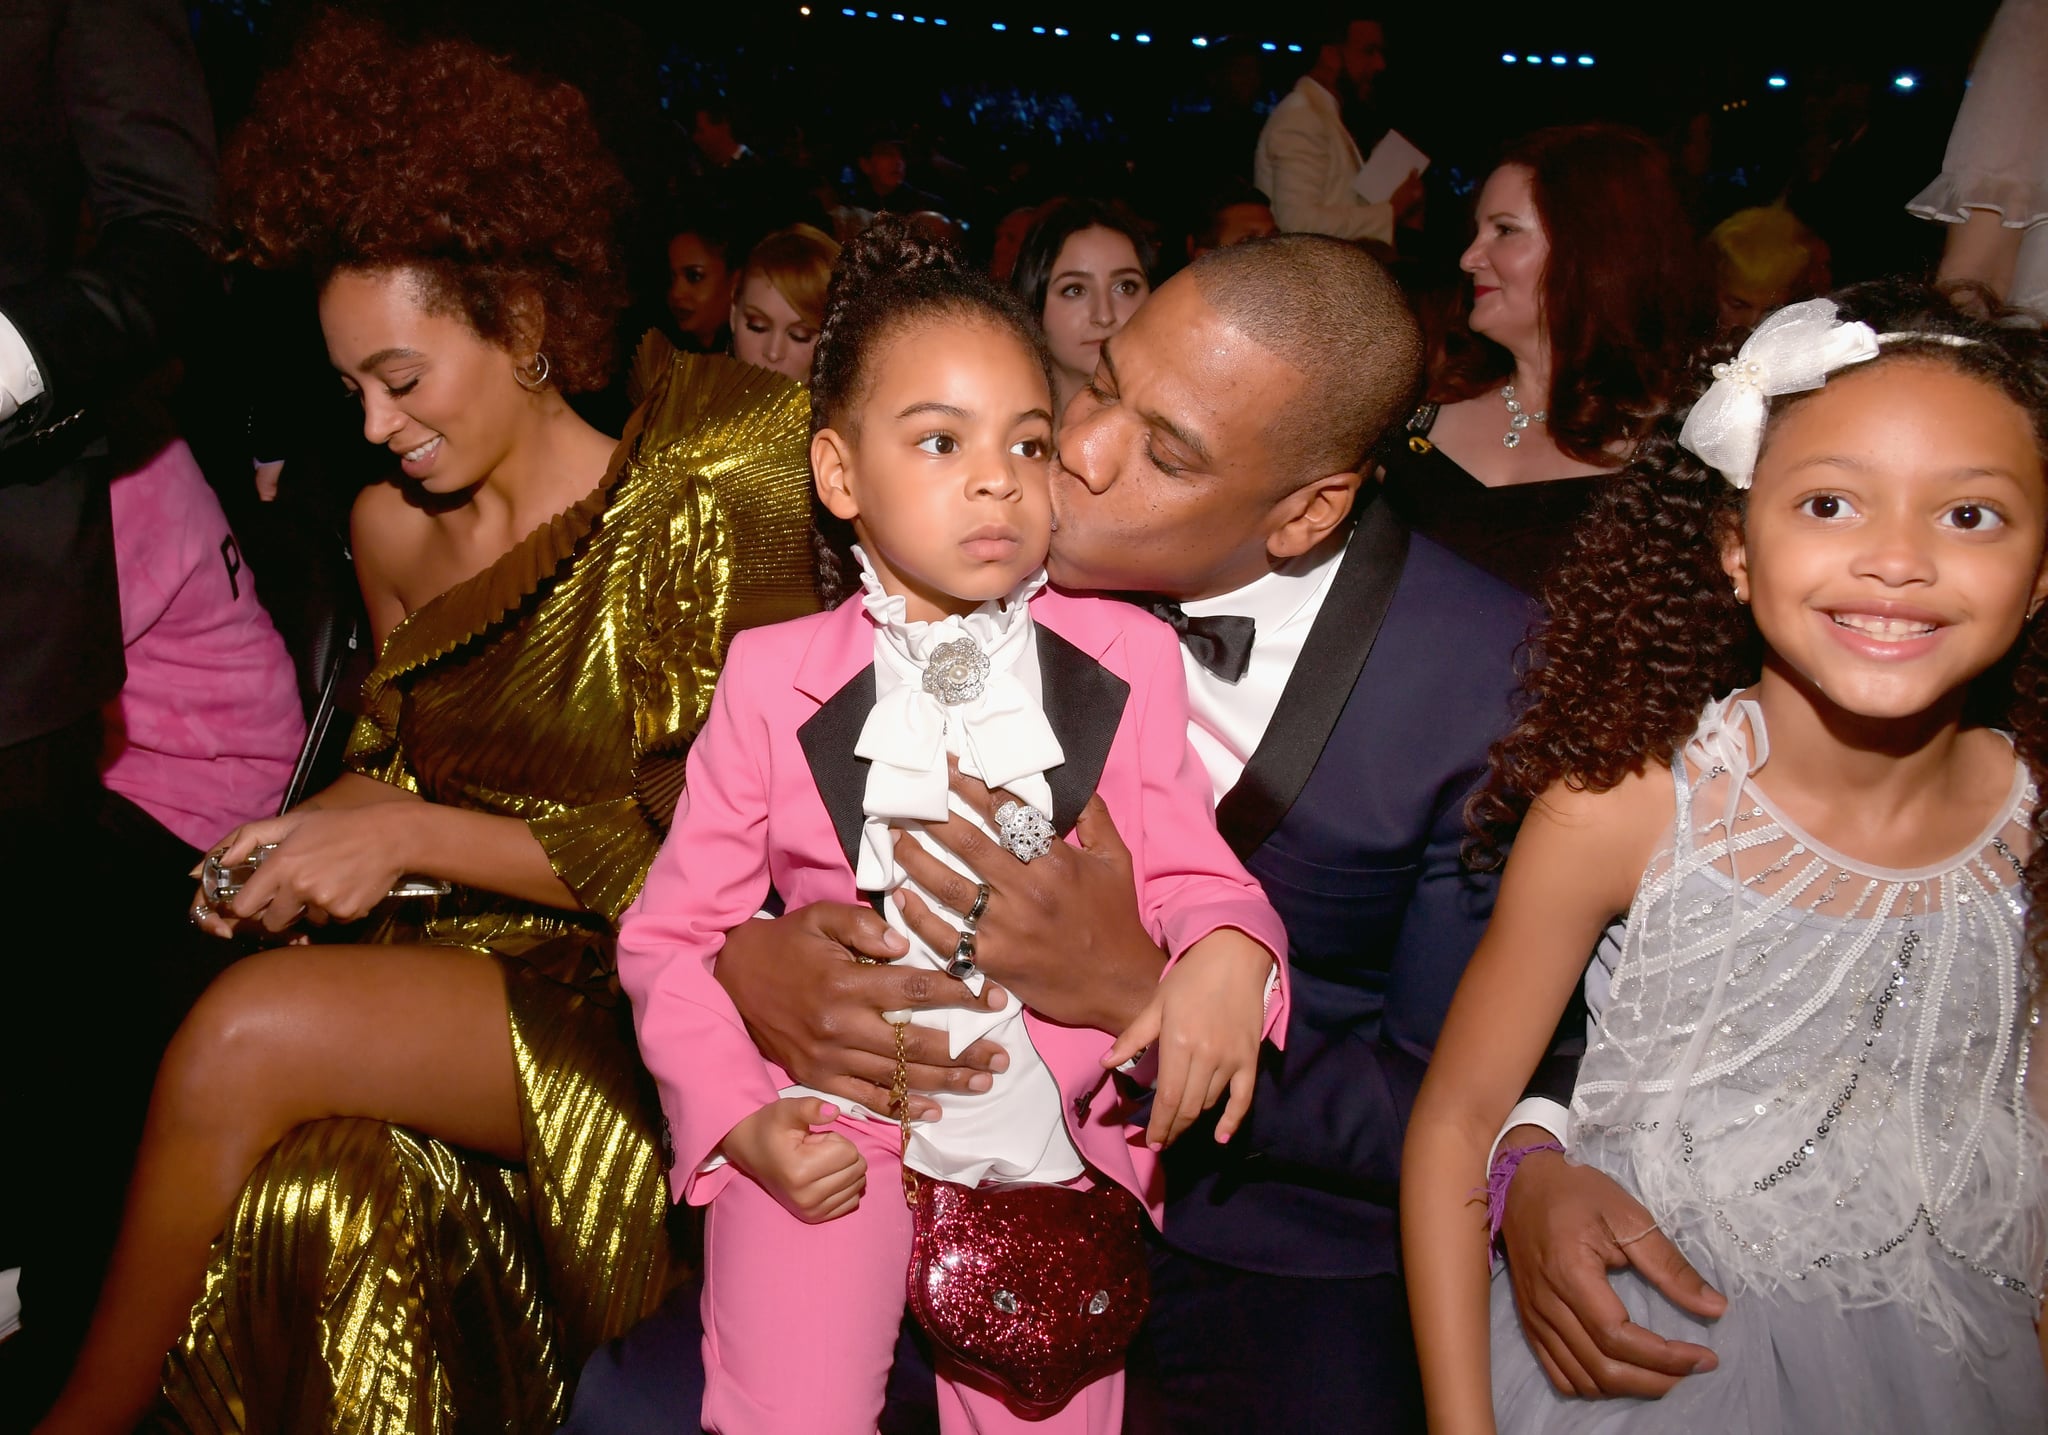 Solange Knowles, Jay Z, and Blue Ivy Carter sat together in 2017.